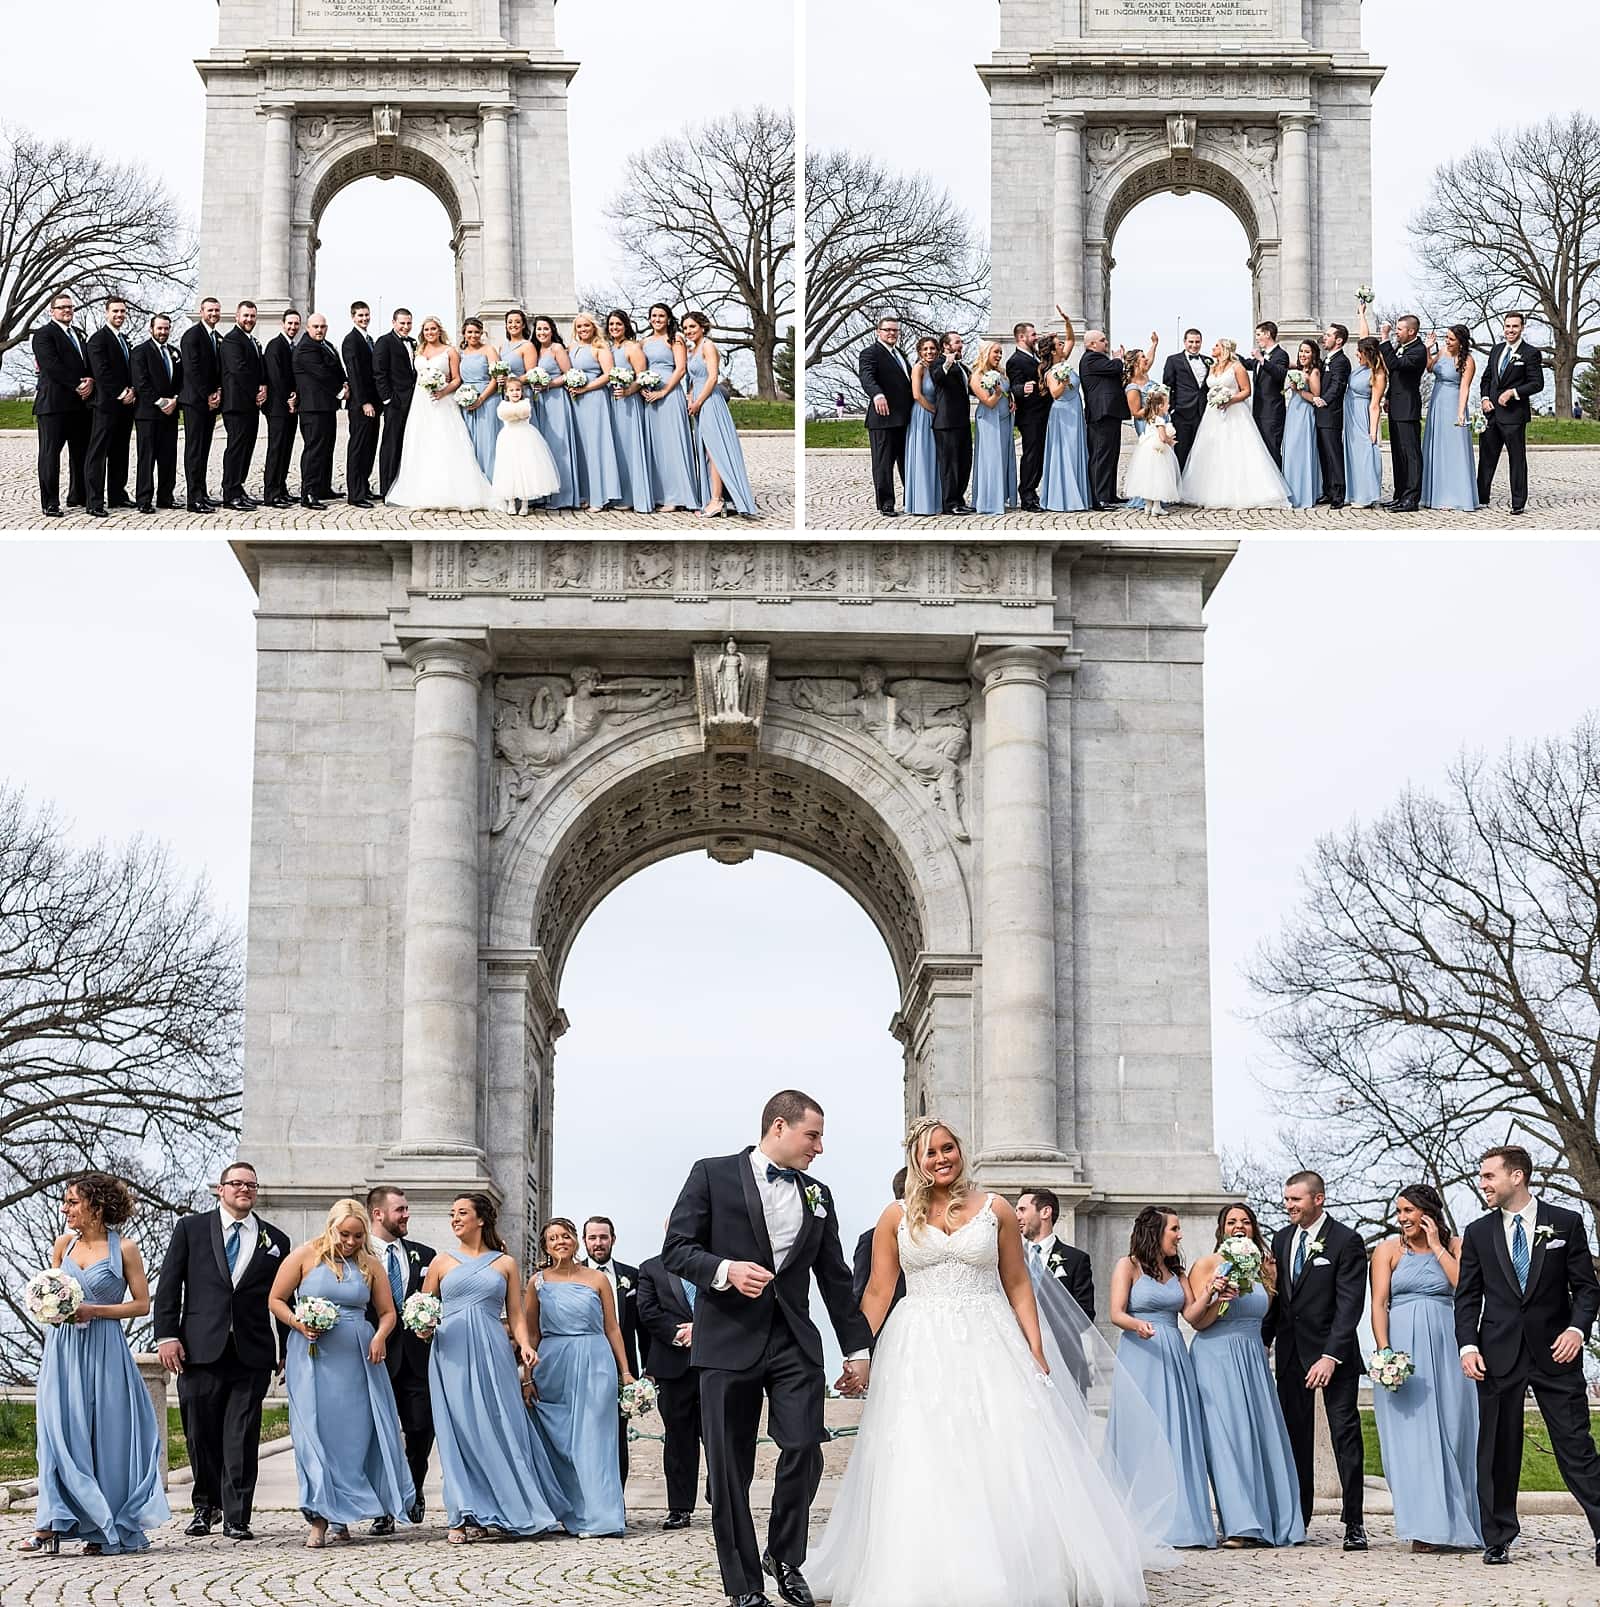 Full wedding party portraits at the memorial arch in Valley Forge National Park.